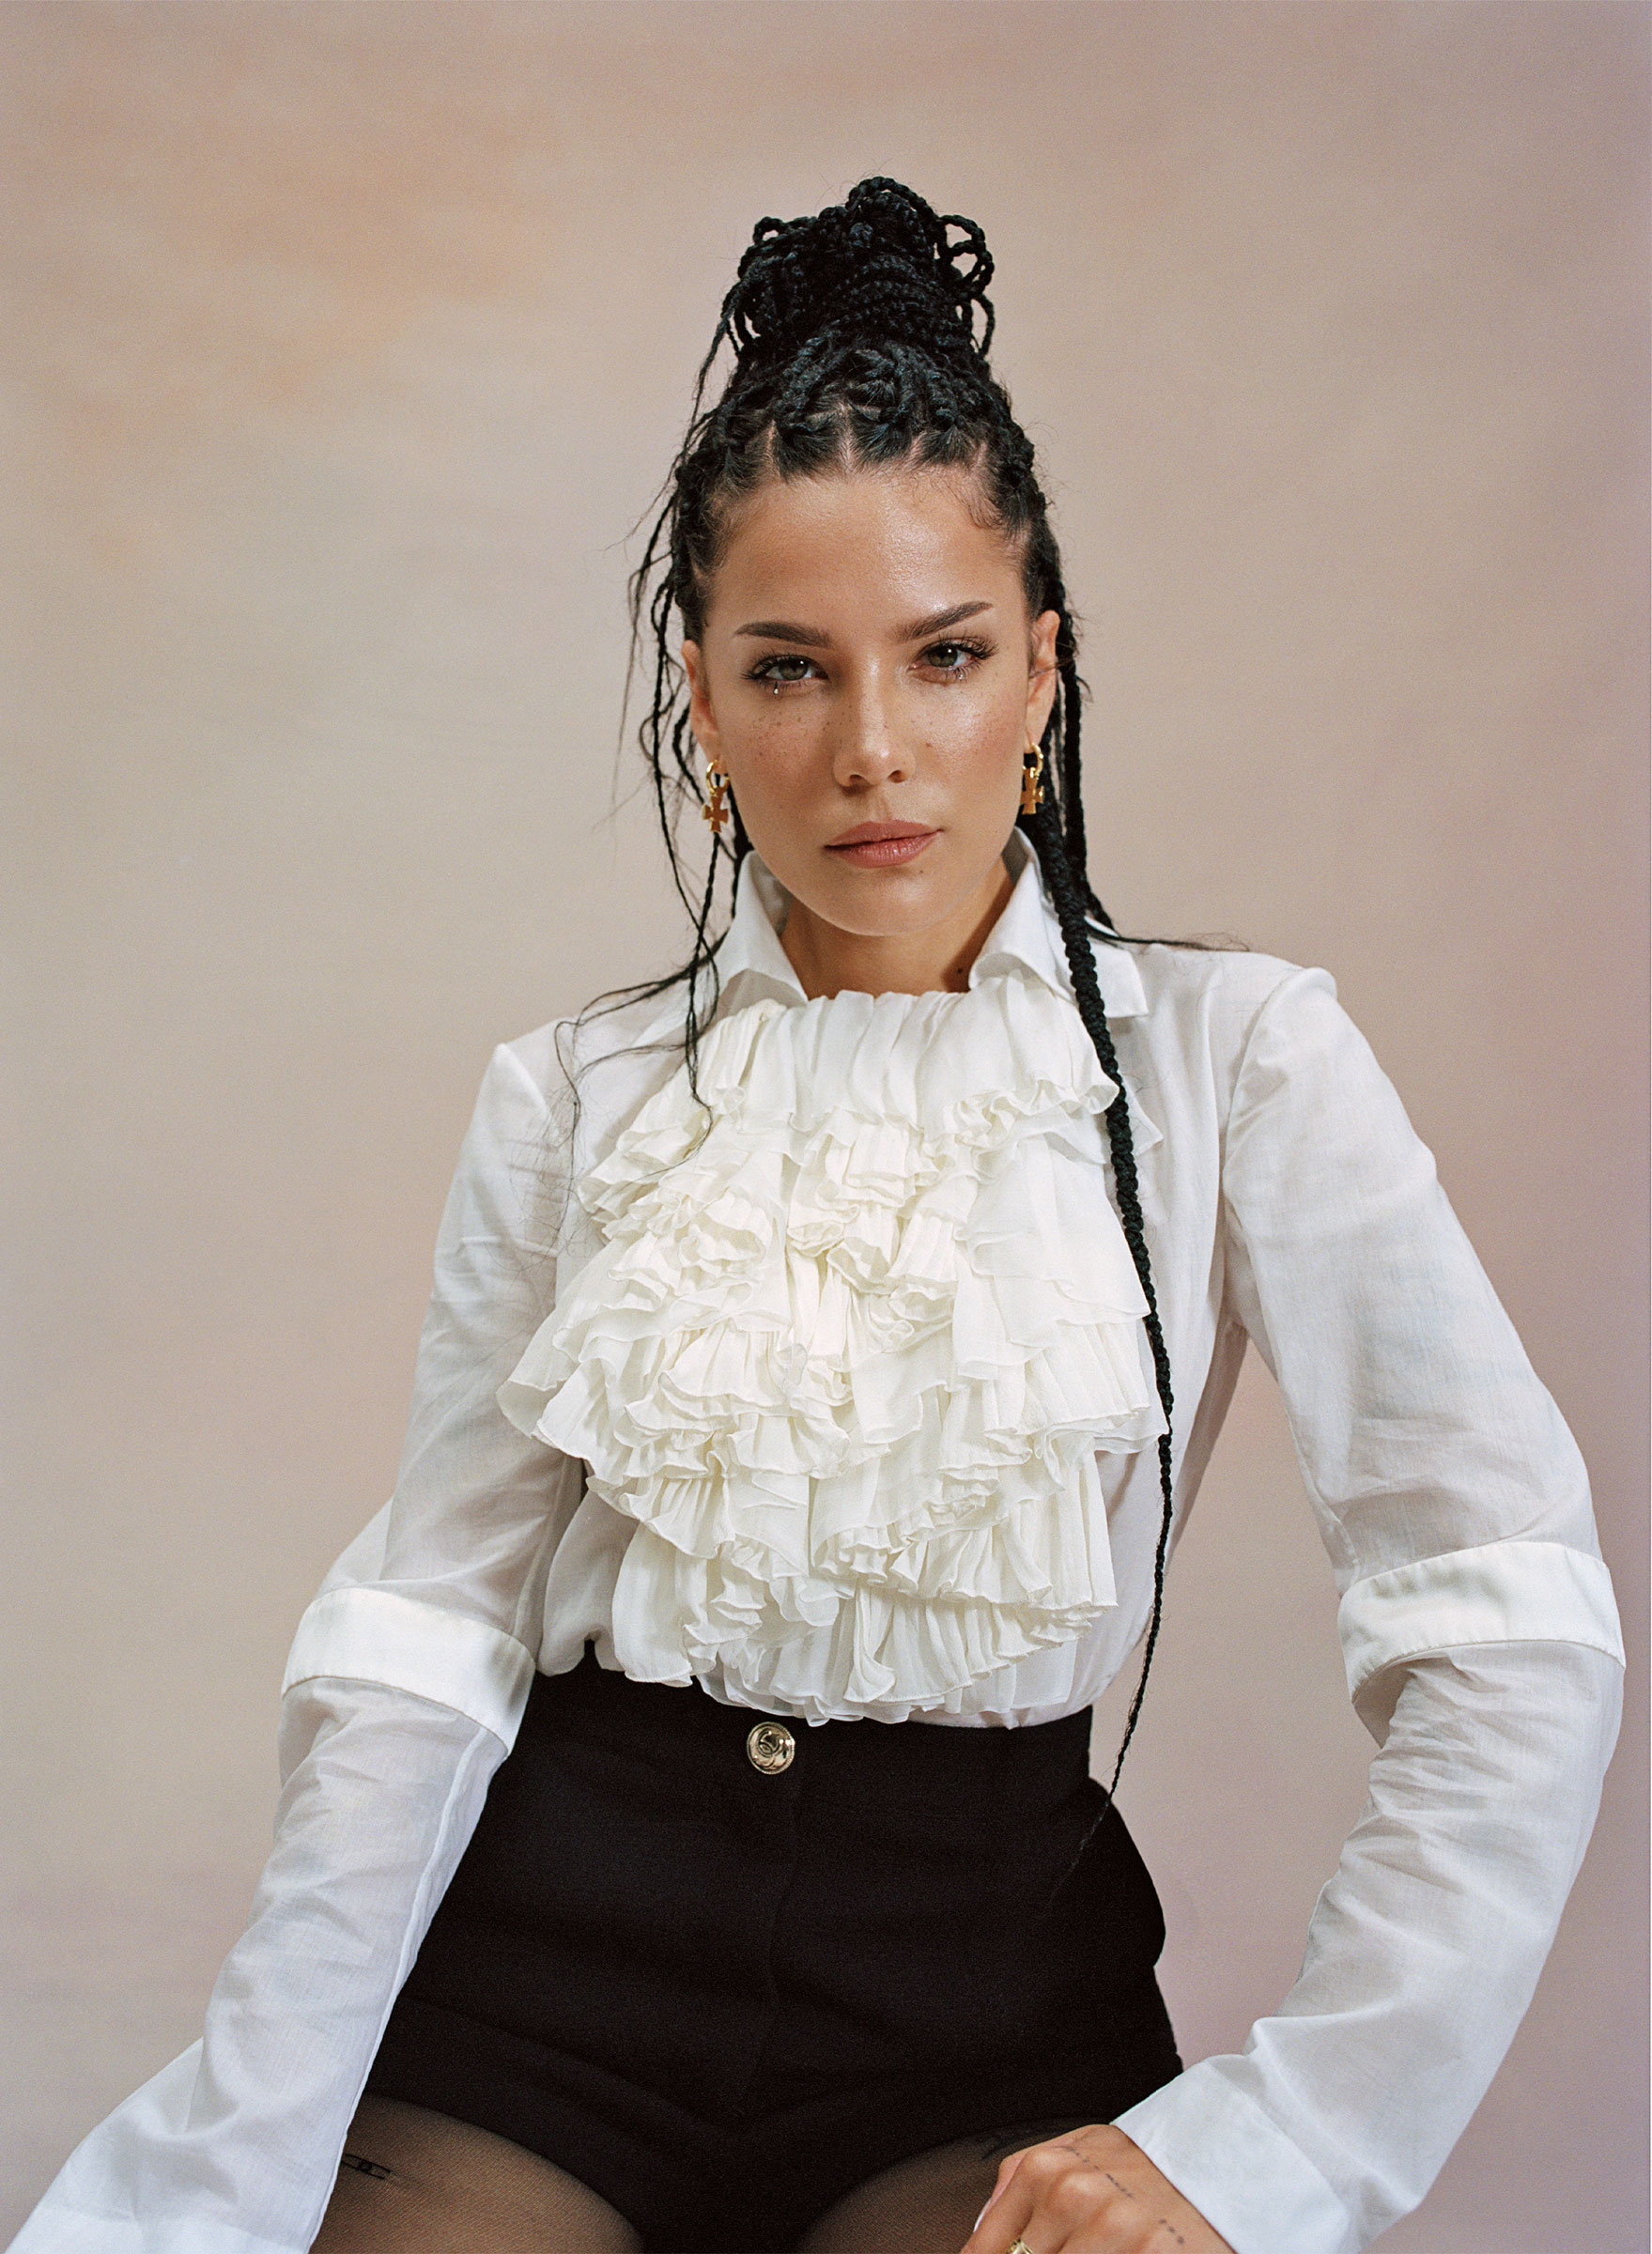 Halsey photographed in Los Angeles, Sept. 15, 2020. (Daria Kobayashi Ritch for TIME)